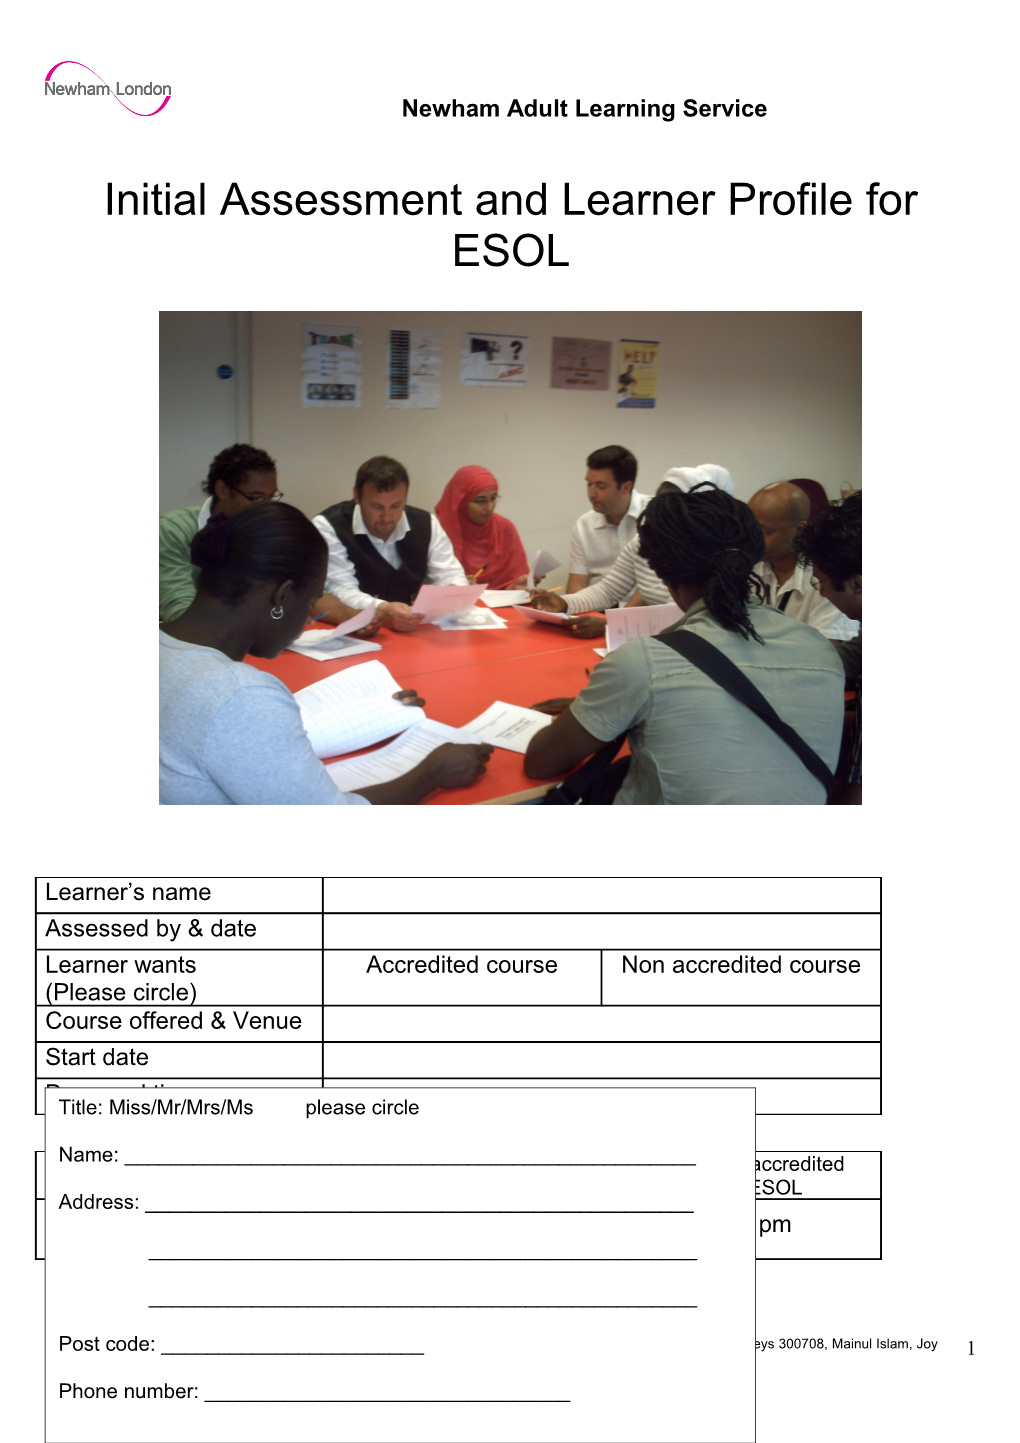 Initial Assessment and Learner Profile for ESOL